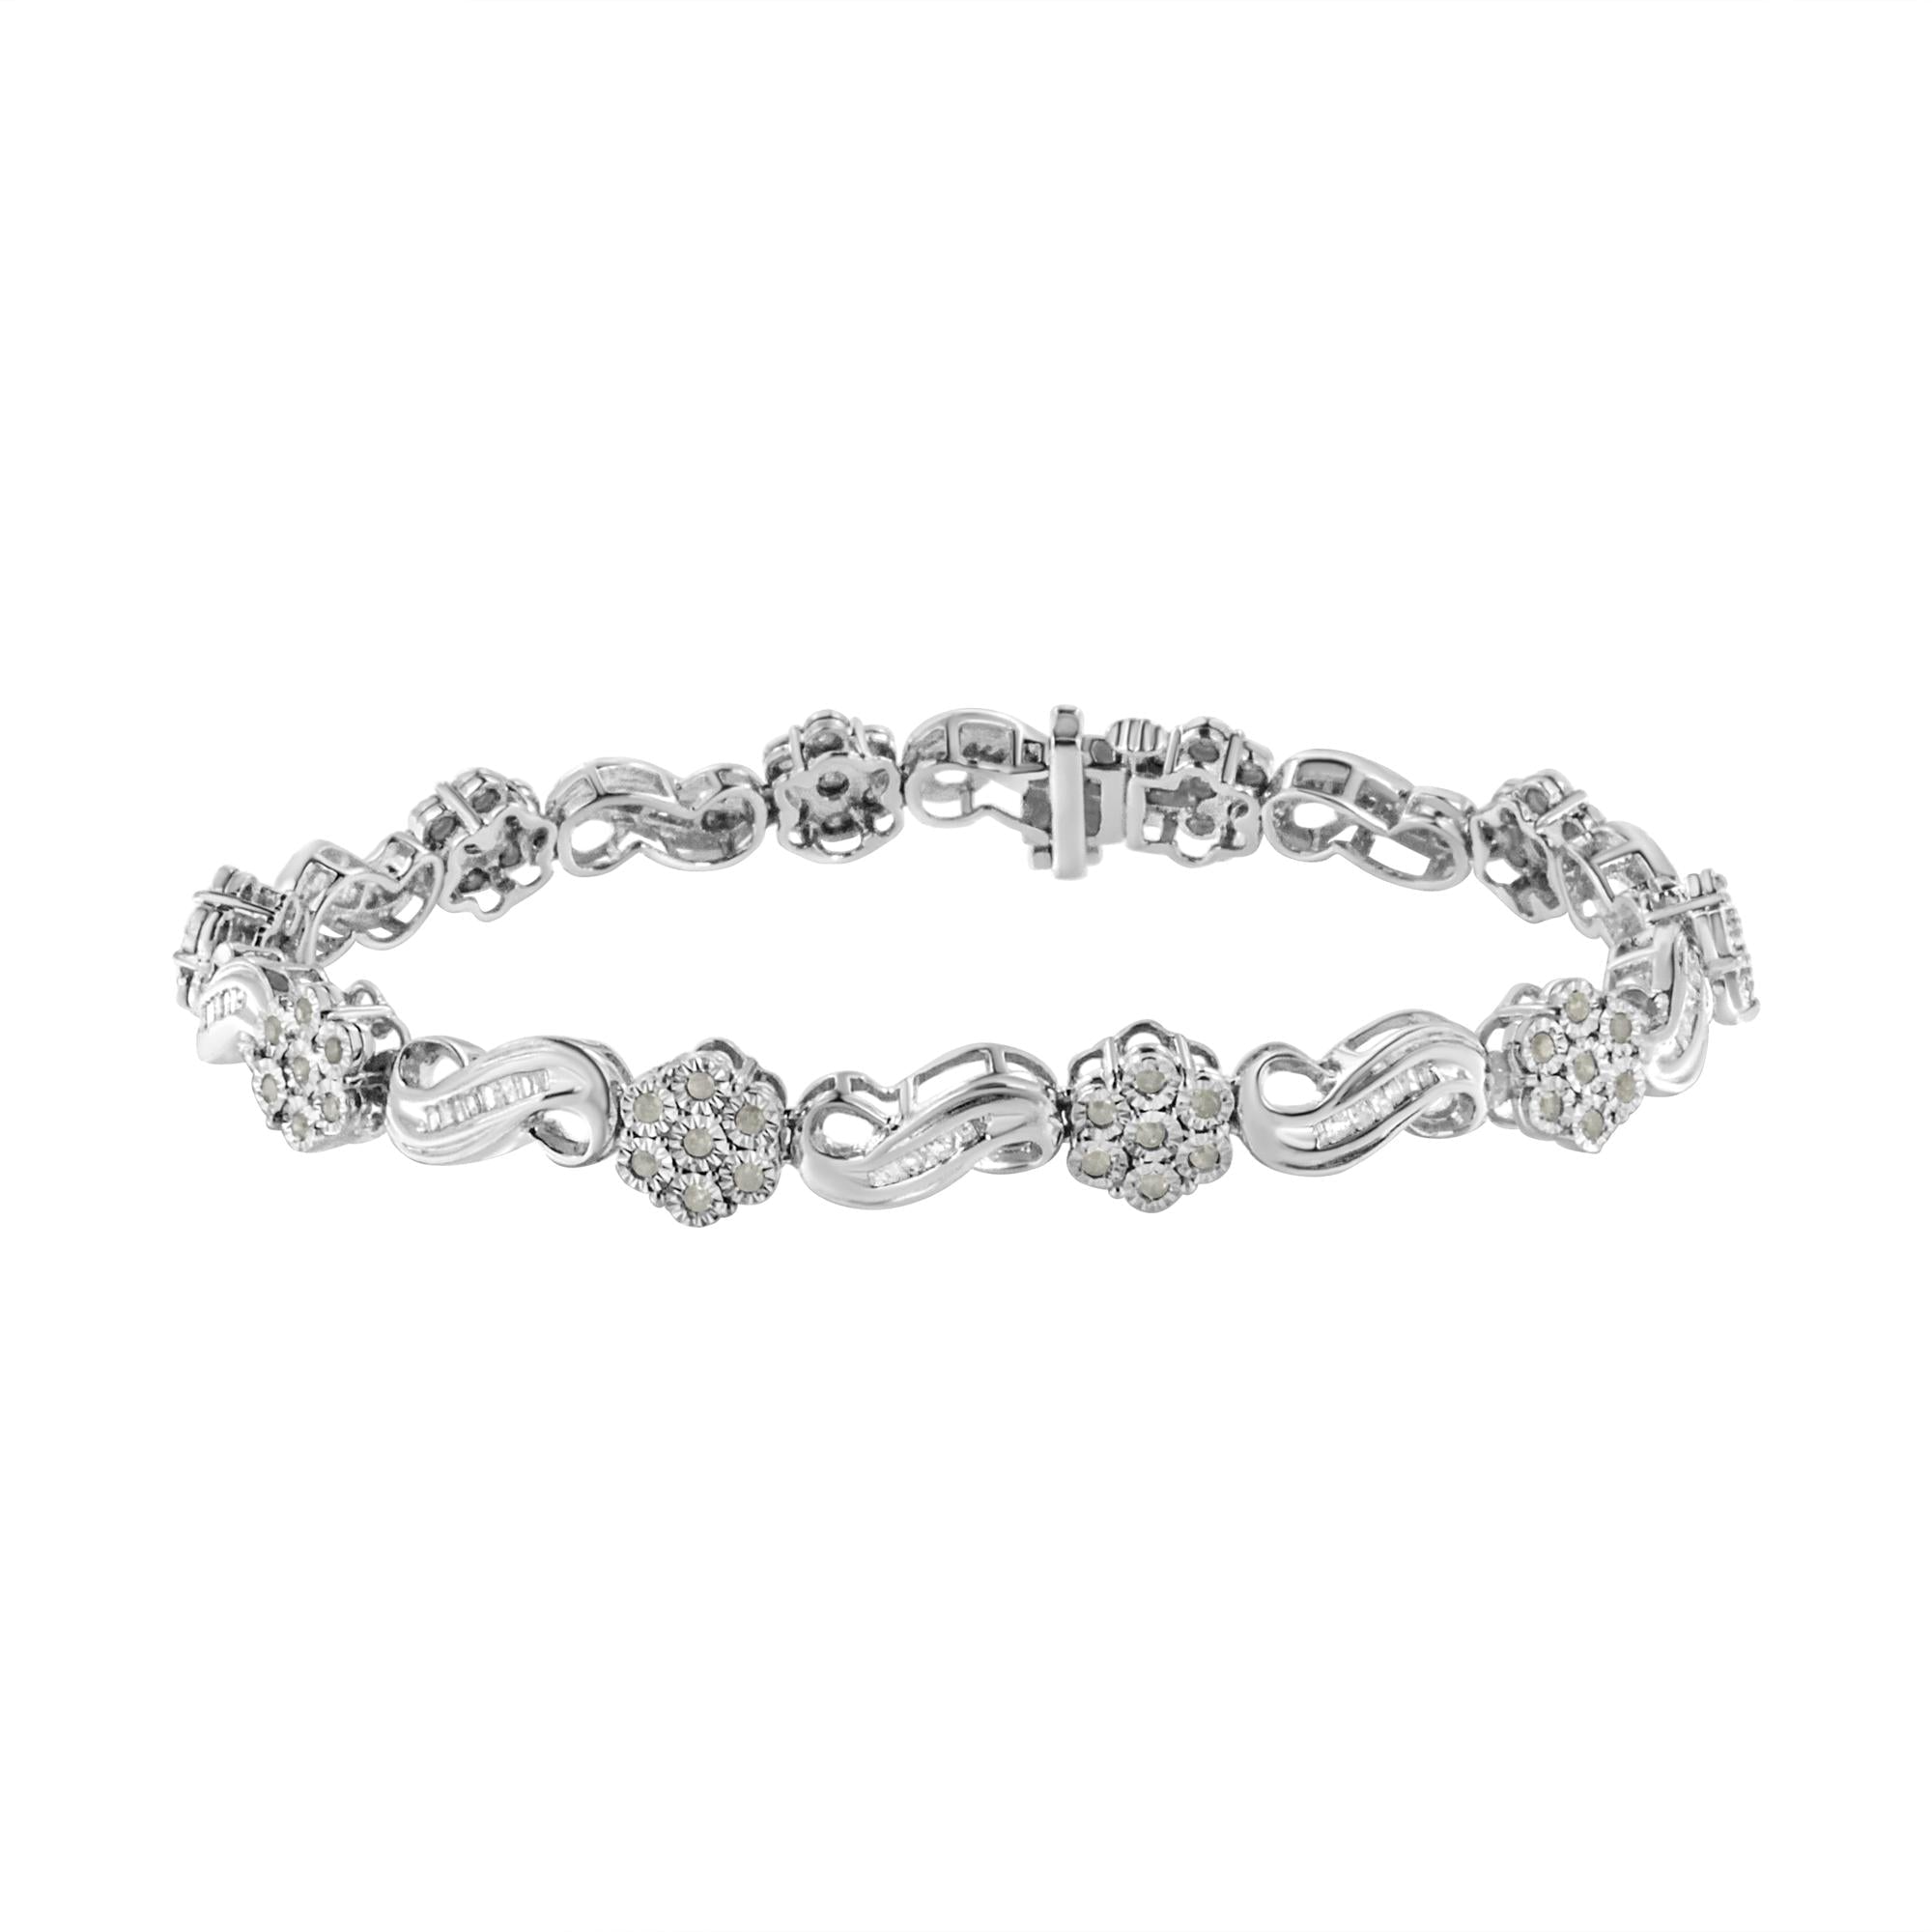 .925 Sterling Silver 1.0 Cttw Miracle and Channel Set Diamond Floral  Cluster and Link Bracelet (I-J Color, I3 Clarity) - 7.25